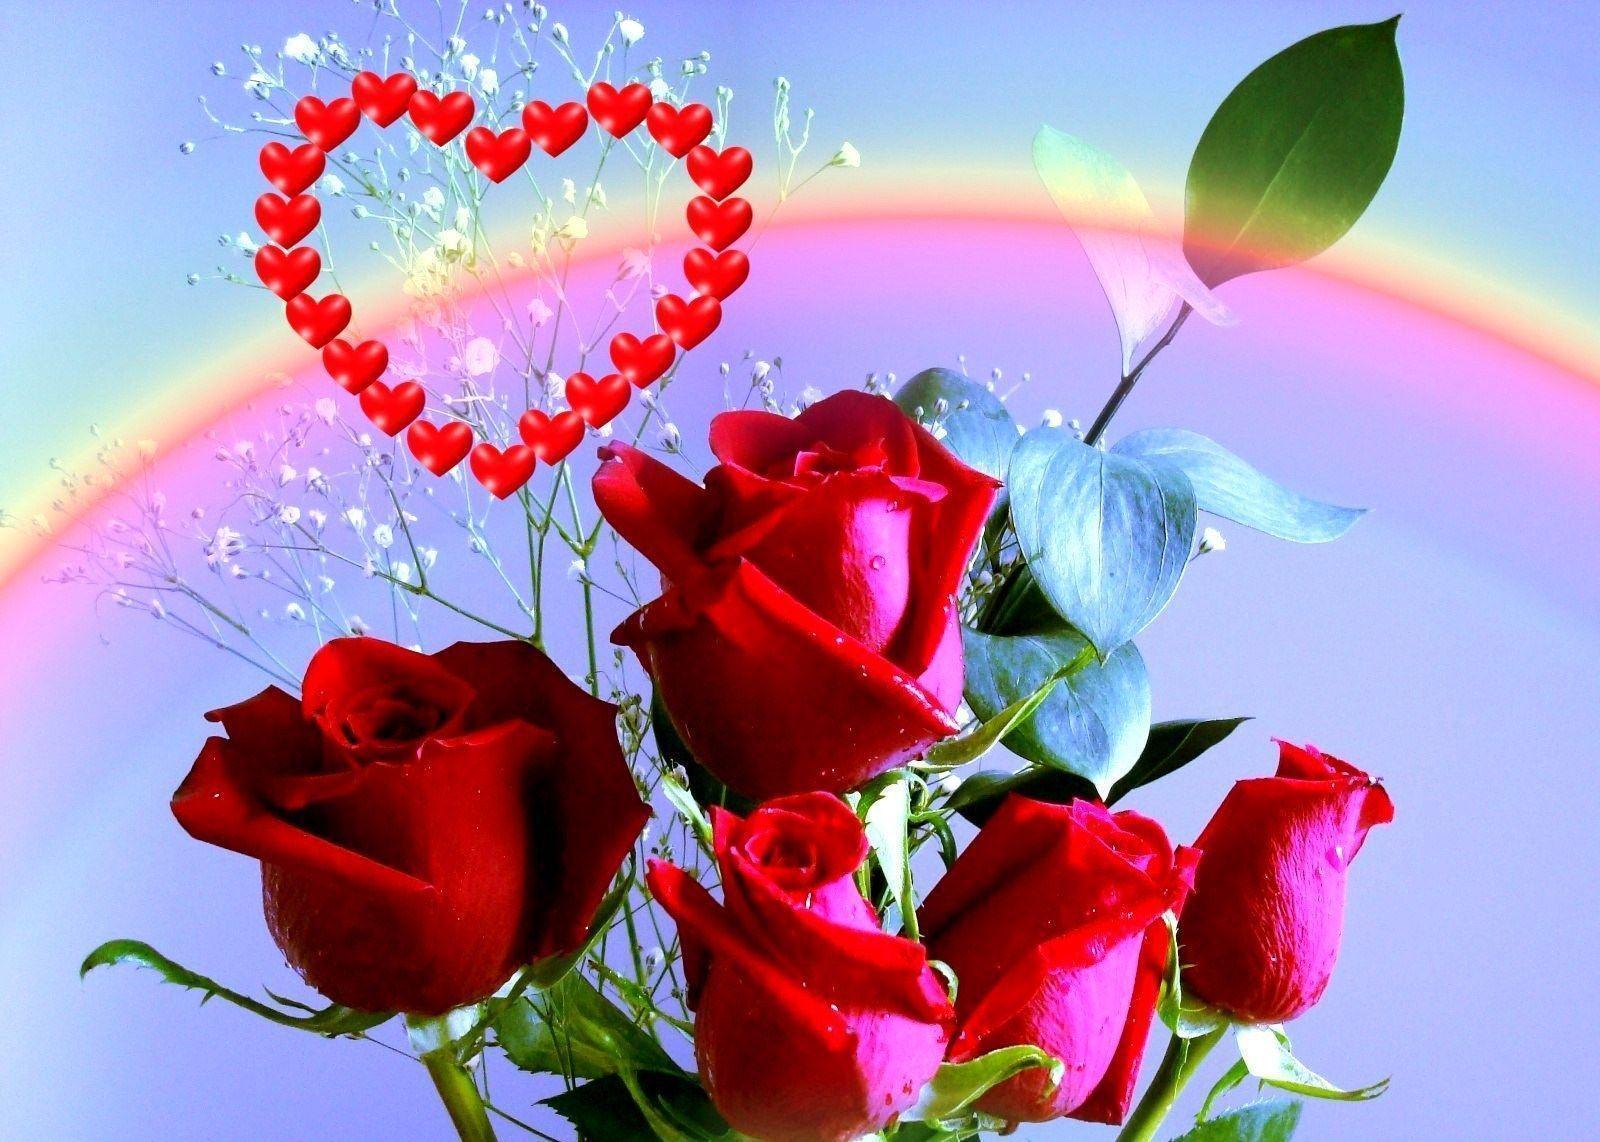 Wallpaper For > Wallpaper Of Red Roses With Heart